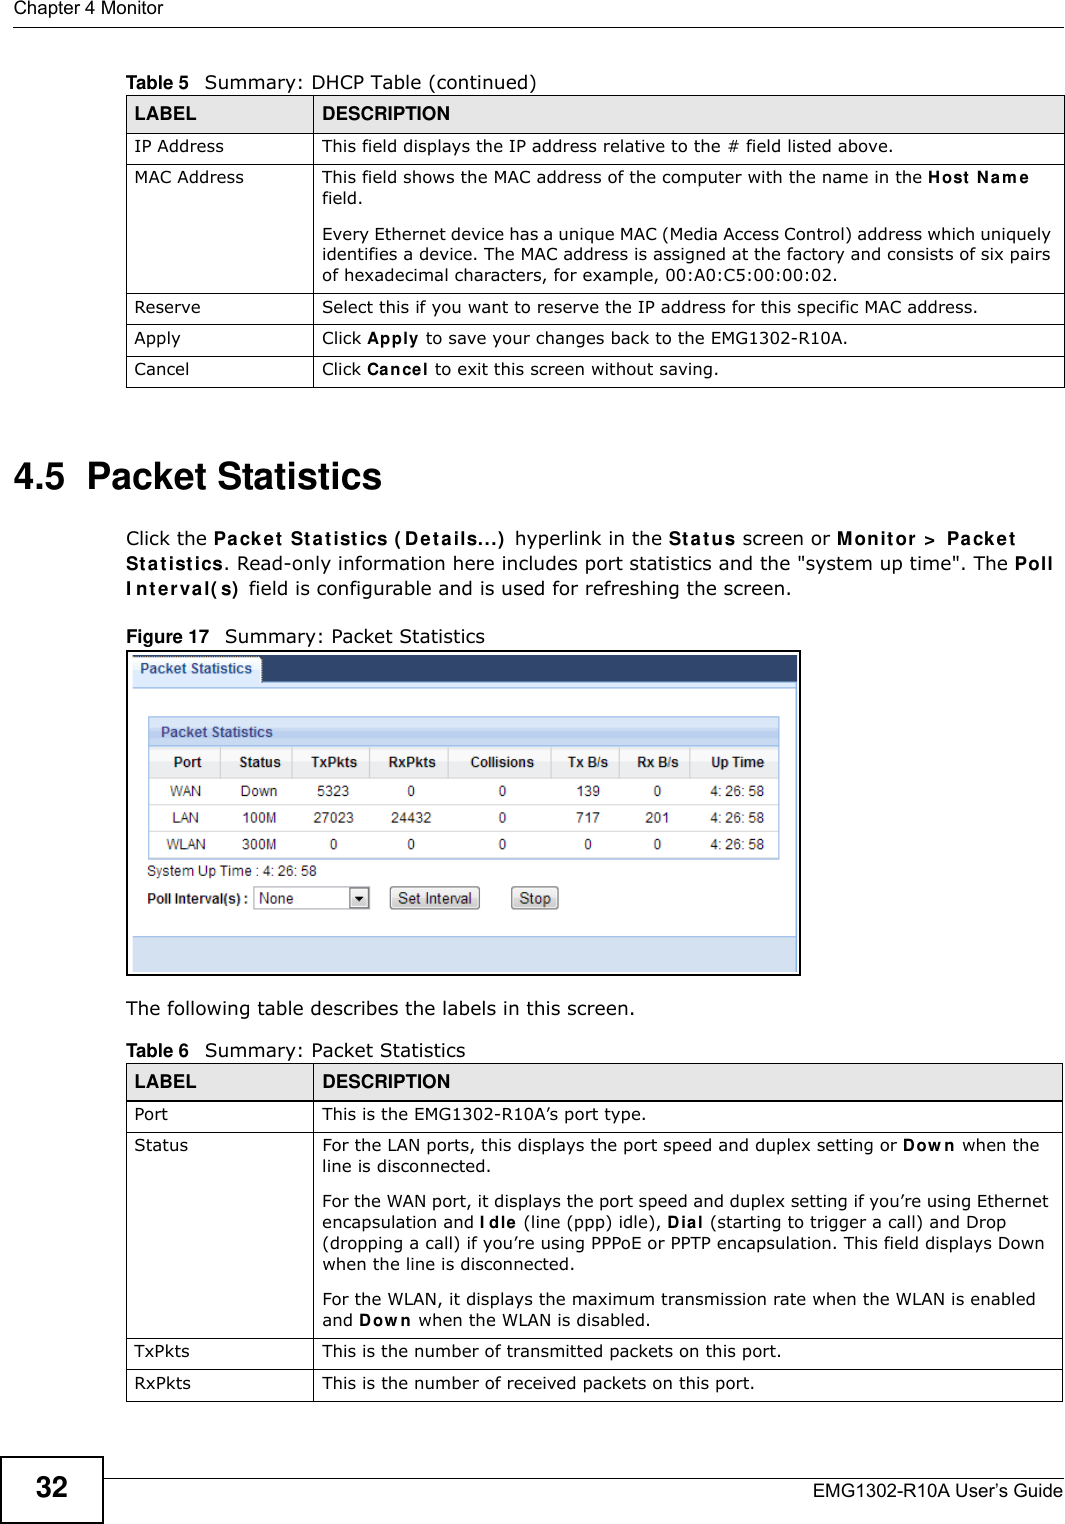 Chapter 4 MonitorEMG1302-R10A User’s Guide324.5  Packet StatisticsClick the Pa cket  Stat ist ics ( Det a ils...)  hyperlink in the Sta t us screen or M onit or  &gt;  Pack et  St a t ist ics. Read-only information here includes port statistics and the &quot;system up time&quot;. The Poll I n t e rval( s)  field is configurable and is used for refreshing the screen.Figure 17   Summary: Packet Statistics The following table describes the labels in this screen.IP Address This field displays the IP address relative to the # field listed above.MAC Address This field shows the MAC address of the computer with the name in the Host  N a m e field.Every Ethernet device has a unique MAC (Media Access Control) address which uniquely identifies a device. The MAC address is assigned at the factory and consists of six pairs of hexadecimal characters, for example, 00:A0:C5:00:00:02.Reserve Select this if you want to reserve the IP address for this specific MAC address.Apply Click Apply  to save your changes back to the EMG1302-R10A.Cancel Click Can cel to exit this screen without saving.Table 5   Summary: DHCP Table (continued)LABEL  DESCRIPTIONTable 6   Summary: Packet StatisticsLABEL DESCRIPTIONPort This is the EMG1302-R10A’s port type.Status For the LAN ports, this displays the port speed and duplex setting or Dow n when the line is disconnected.For the WAN port, it displays the port speed and duplex setting if you’re using Ethernet encapsulation and I dle (line (ppp) idle), Dial (starting to trigger a call) and Drop (dropping a call) if you’re using PPPoE or PPTP encapsulation. This field displays Down when the line is disconnected.For the WLAN, it displays the maximum transmission rate when the WLAN is enabled and Dow n when the WLAN is disabled.TxPkts  This is the number of transmitted packets on this port.RxPkts  This is the number of received packets on this port.